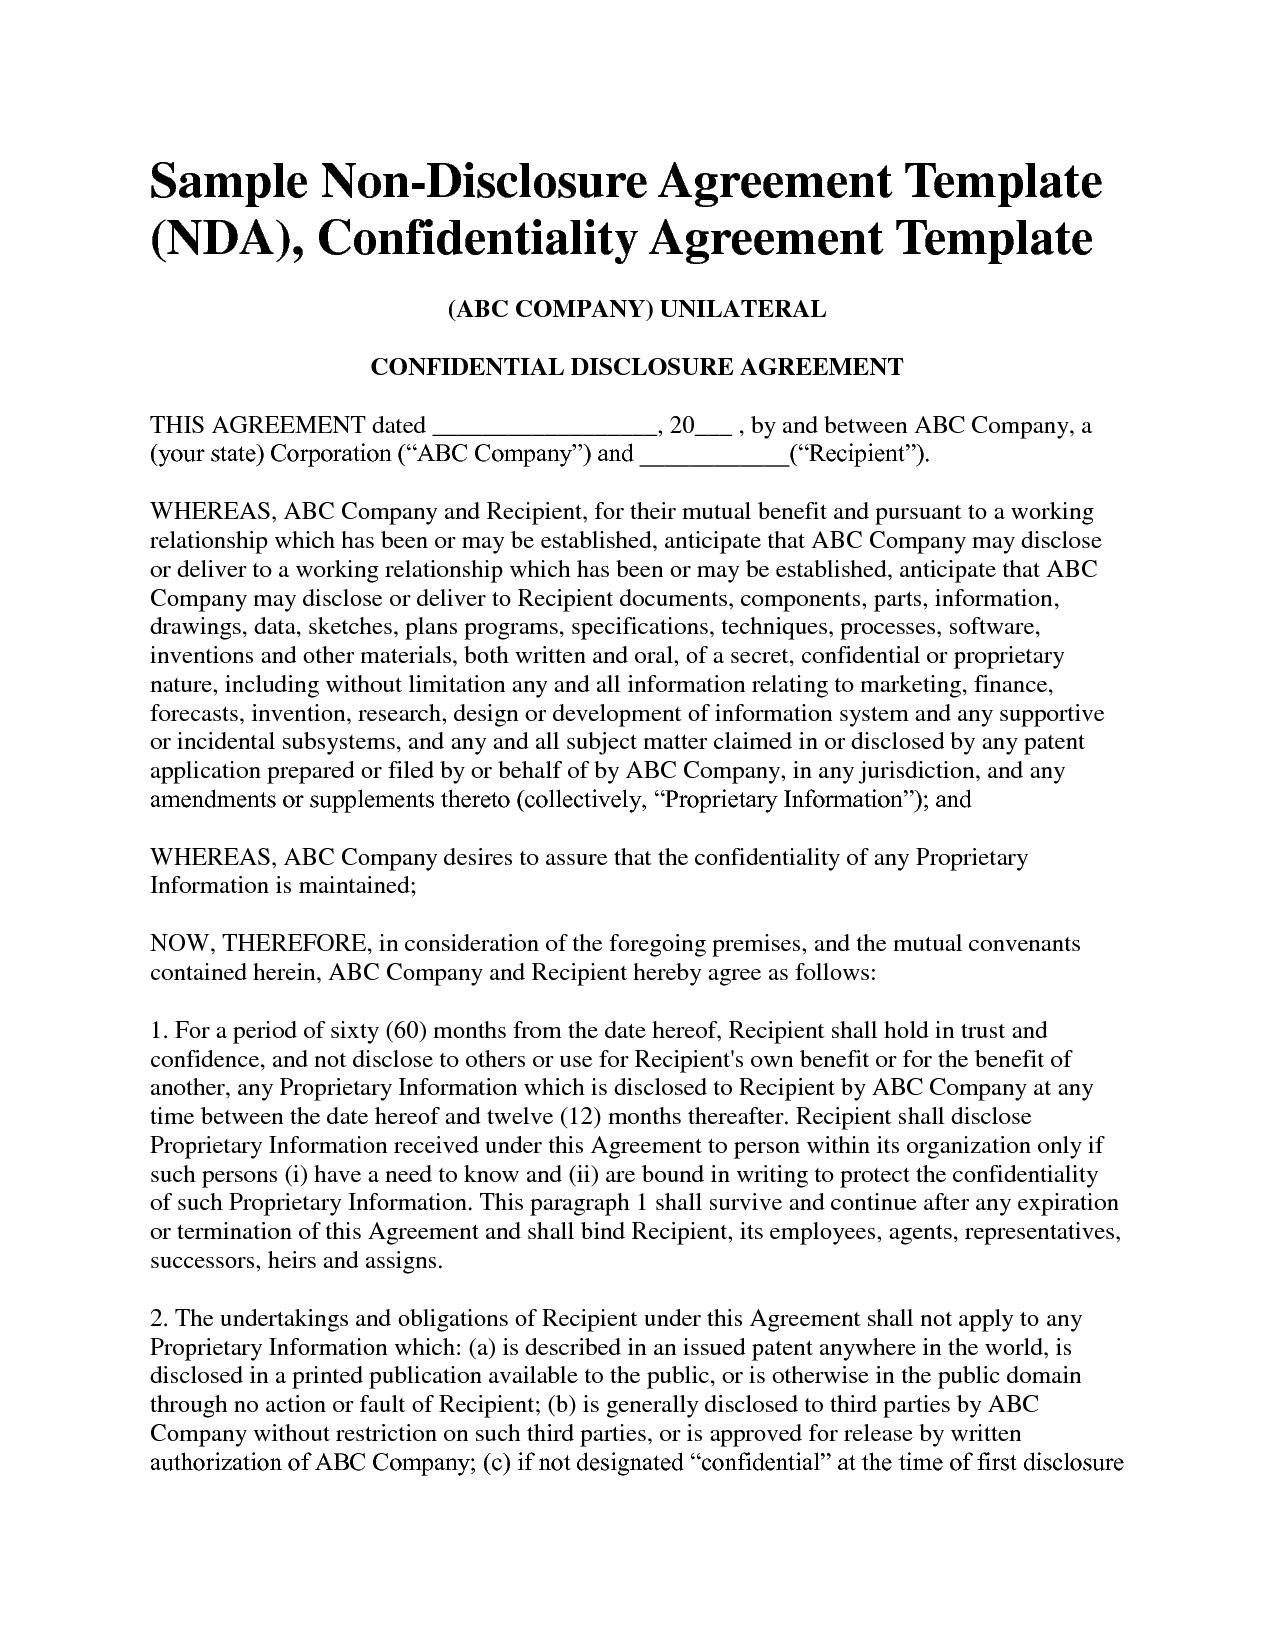 Non Disclosure Agreement Template Free Sample Nda Template Mvrsqrn - Free Printable Non Disclosure Agreement Form